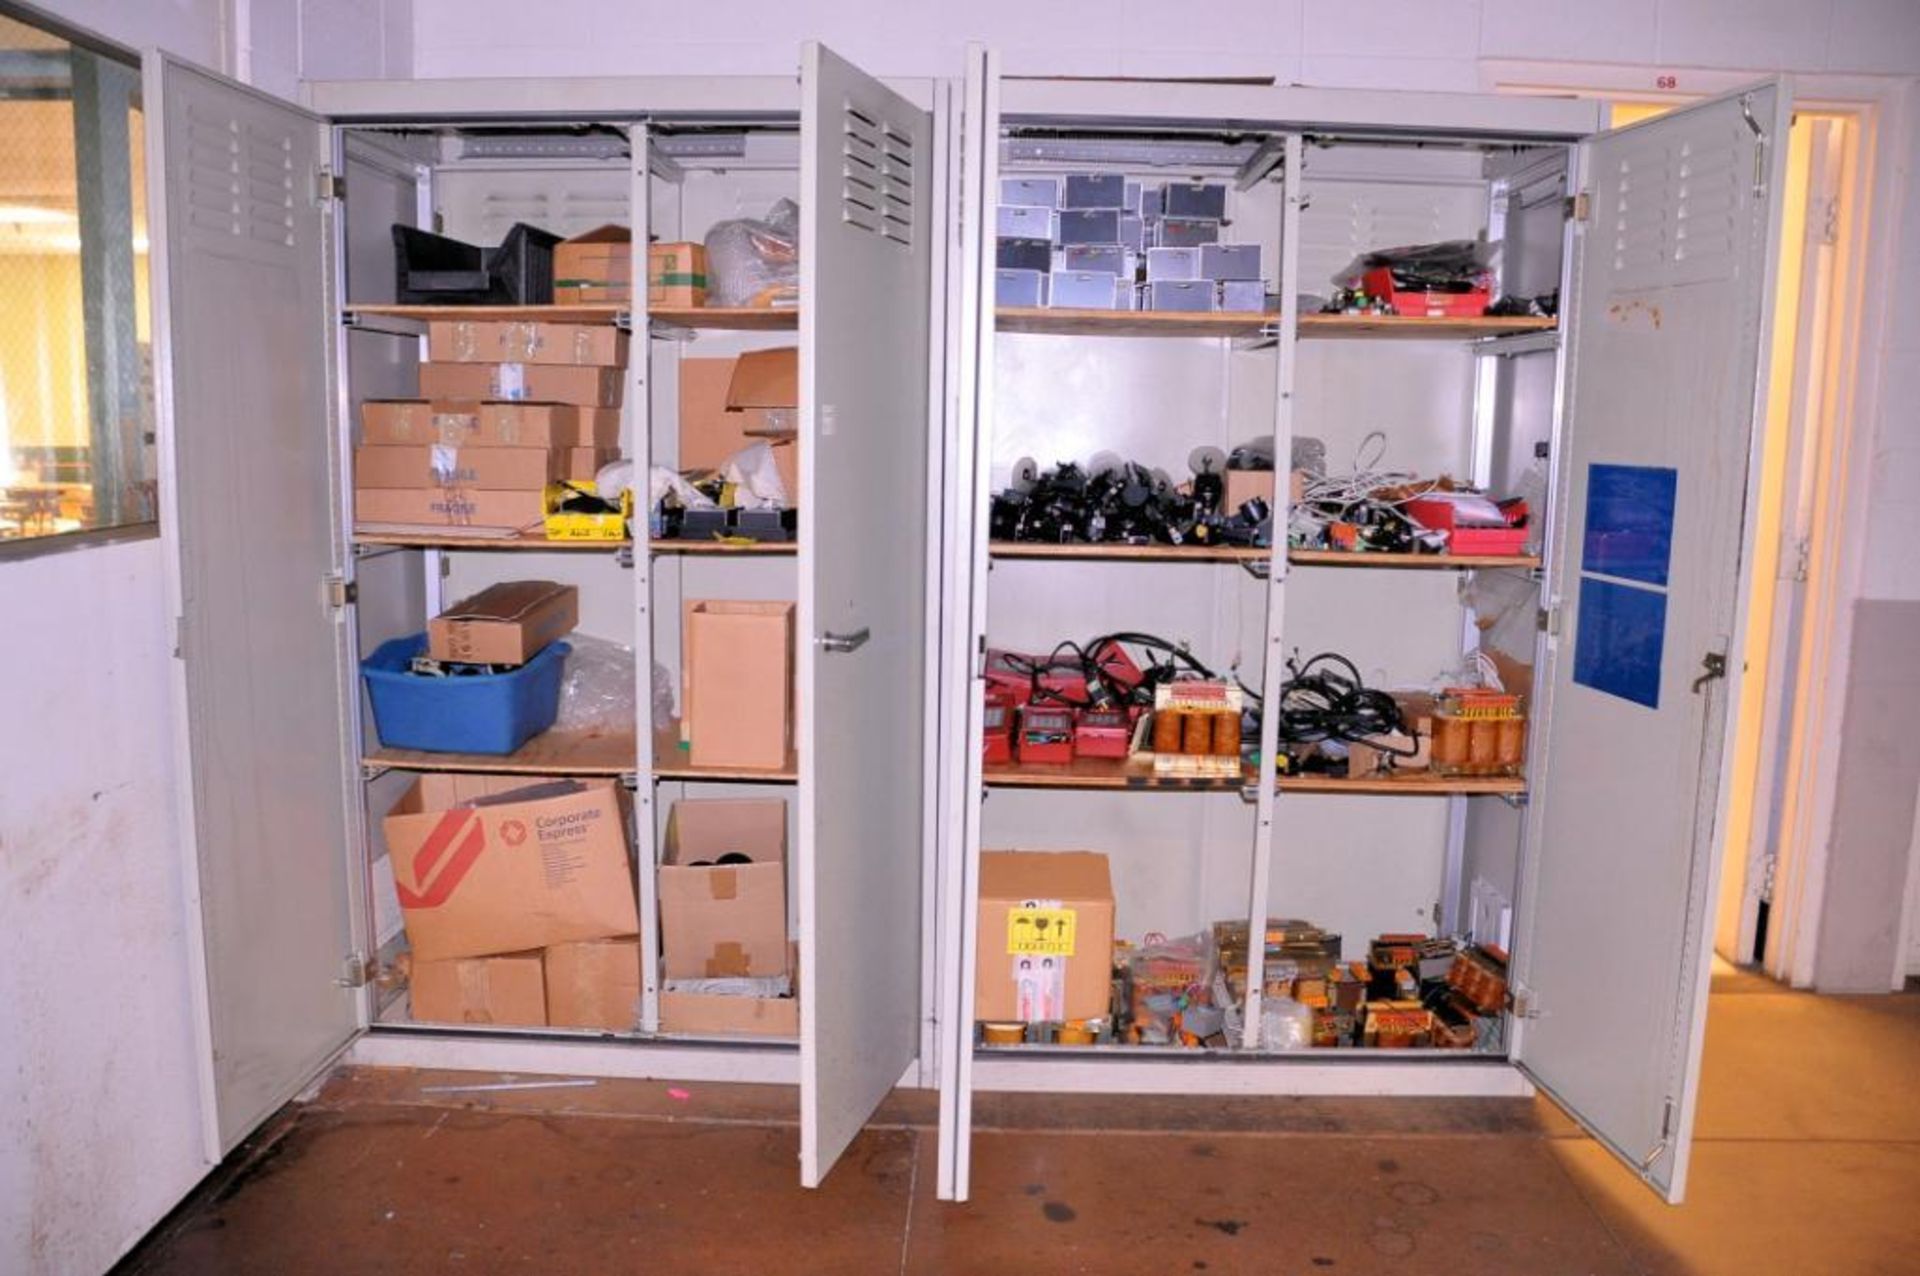 Lot - (4) Heavy Duty 2-Door Supply Cabinets with Electronic Boards and Machine Parts - Image 2 of 2